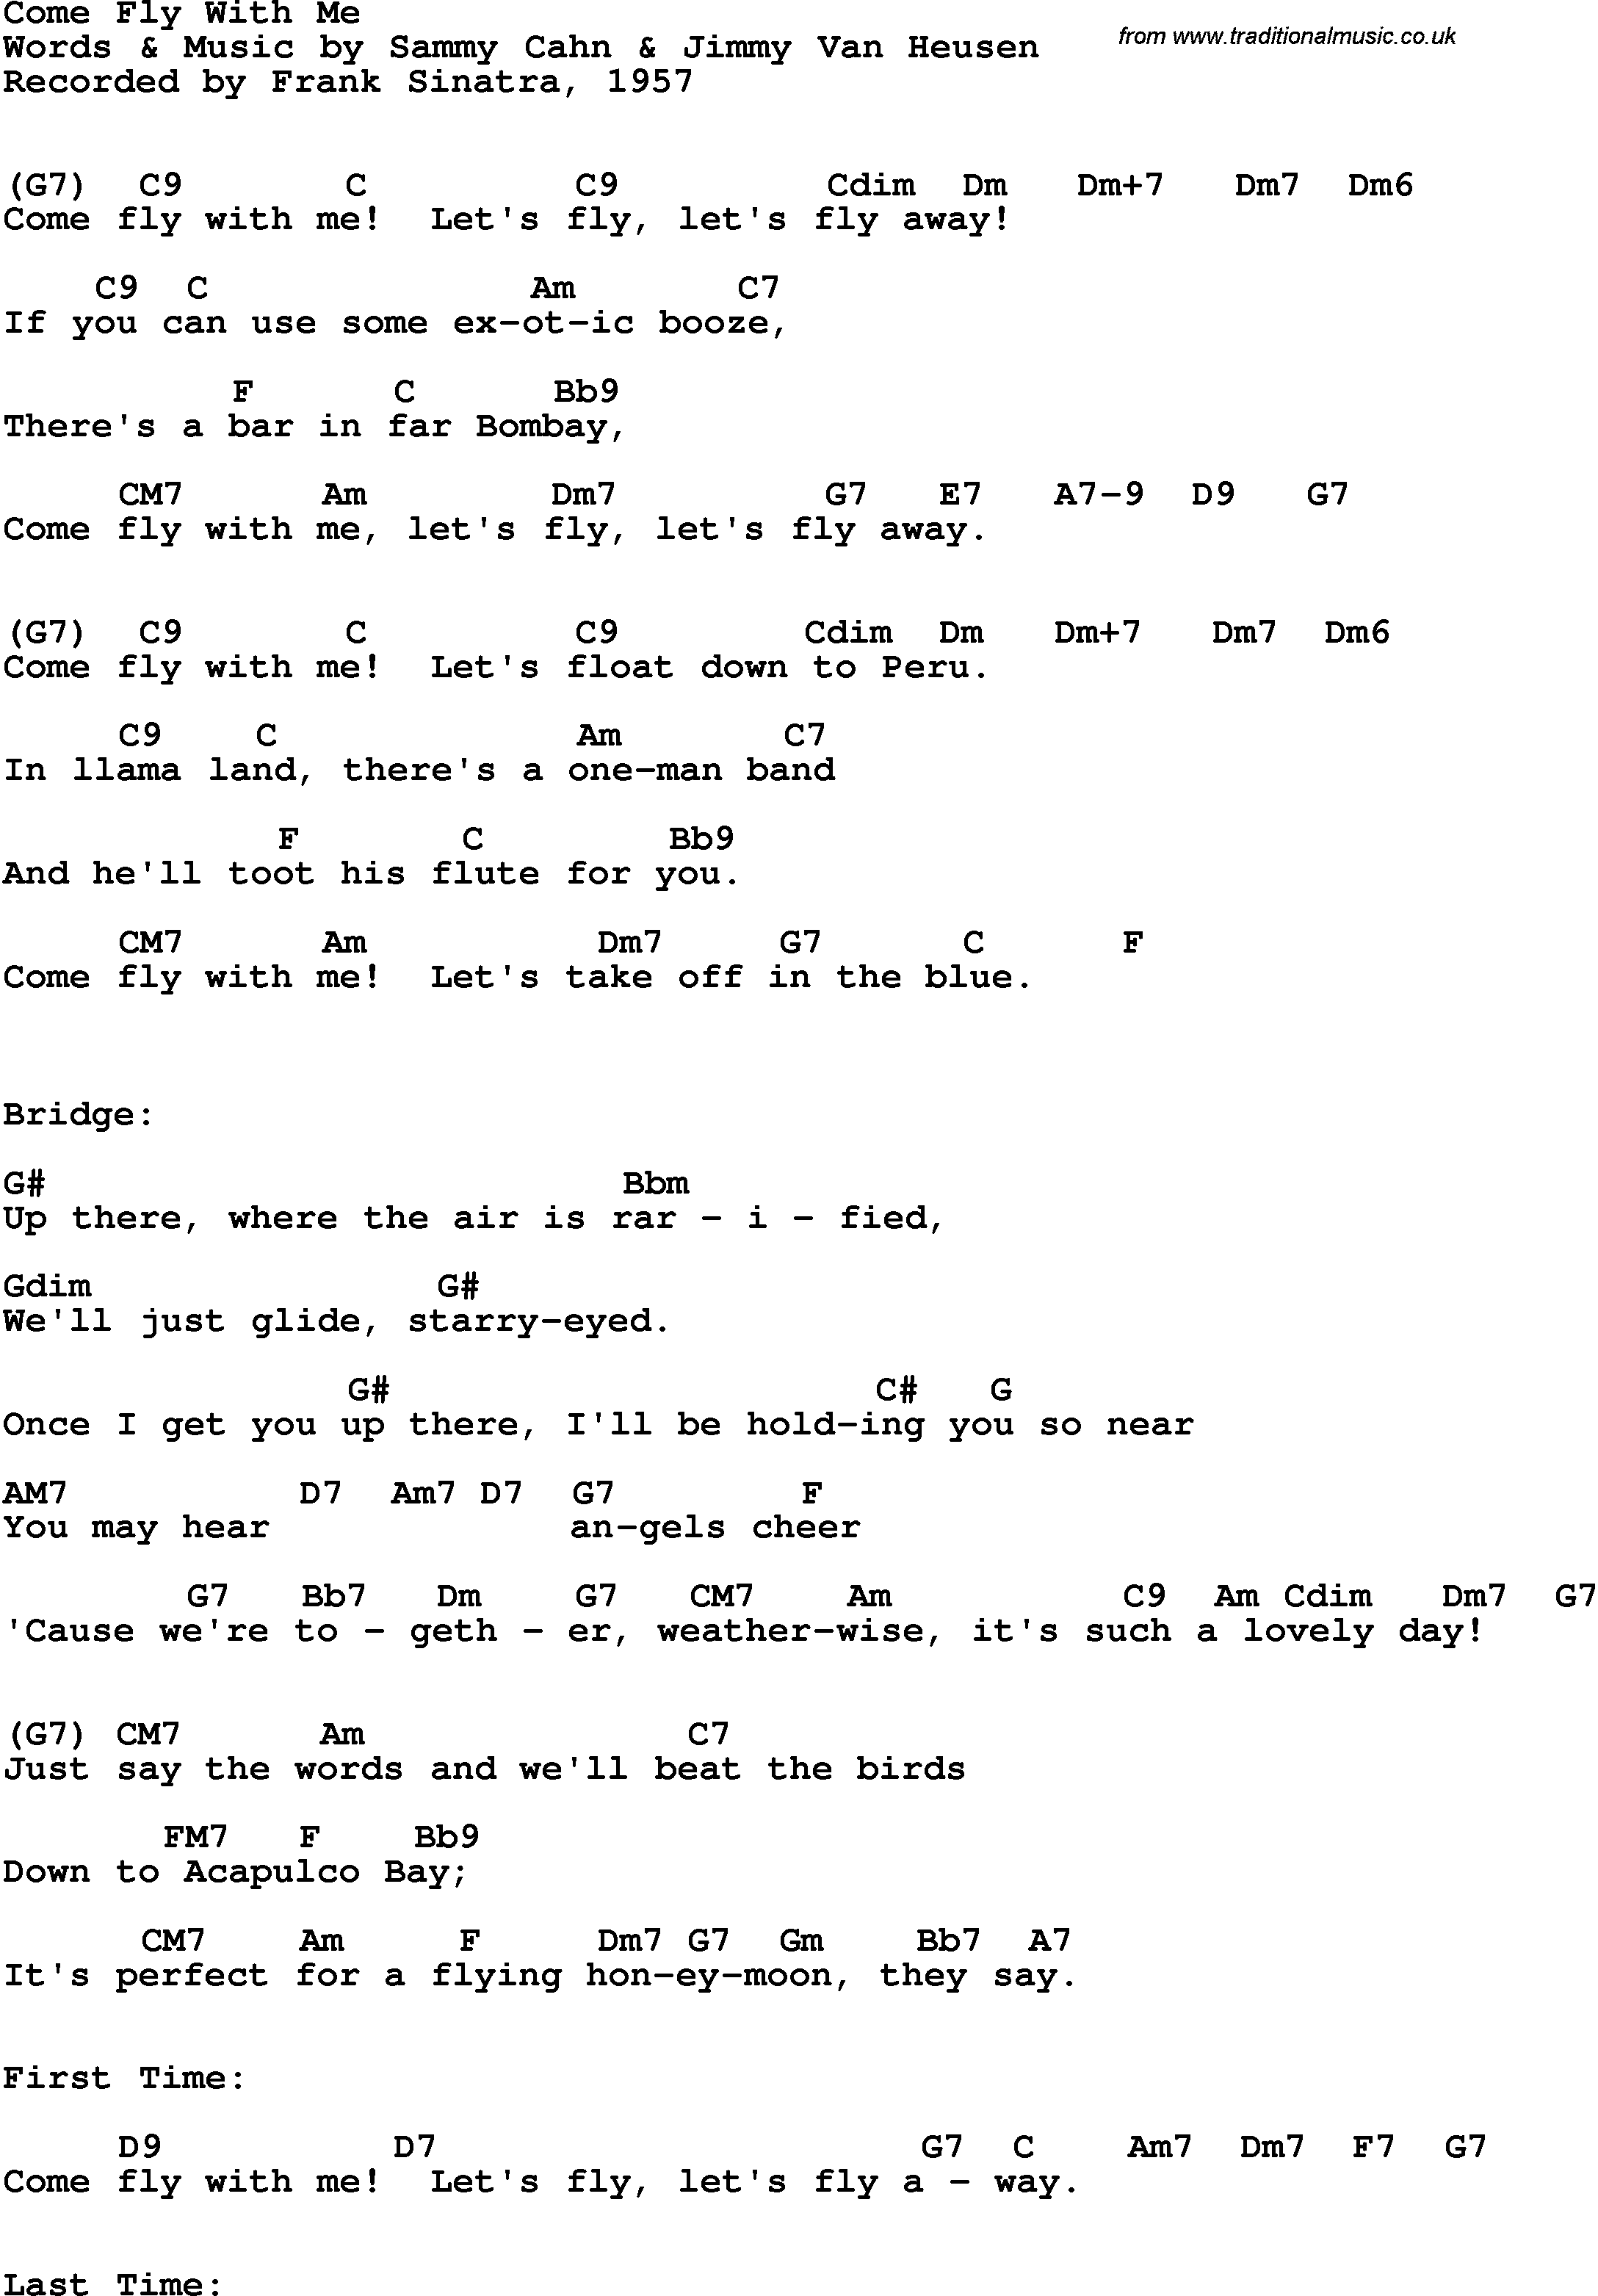 Song Lyrics with guitar chords for Come Fly With Me - Frank Sinatra, 1957